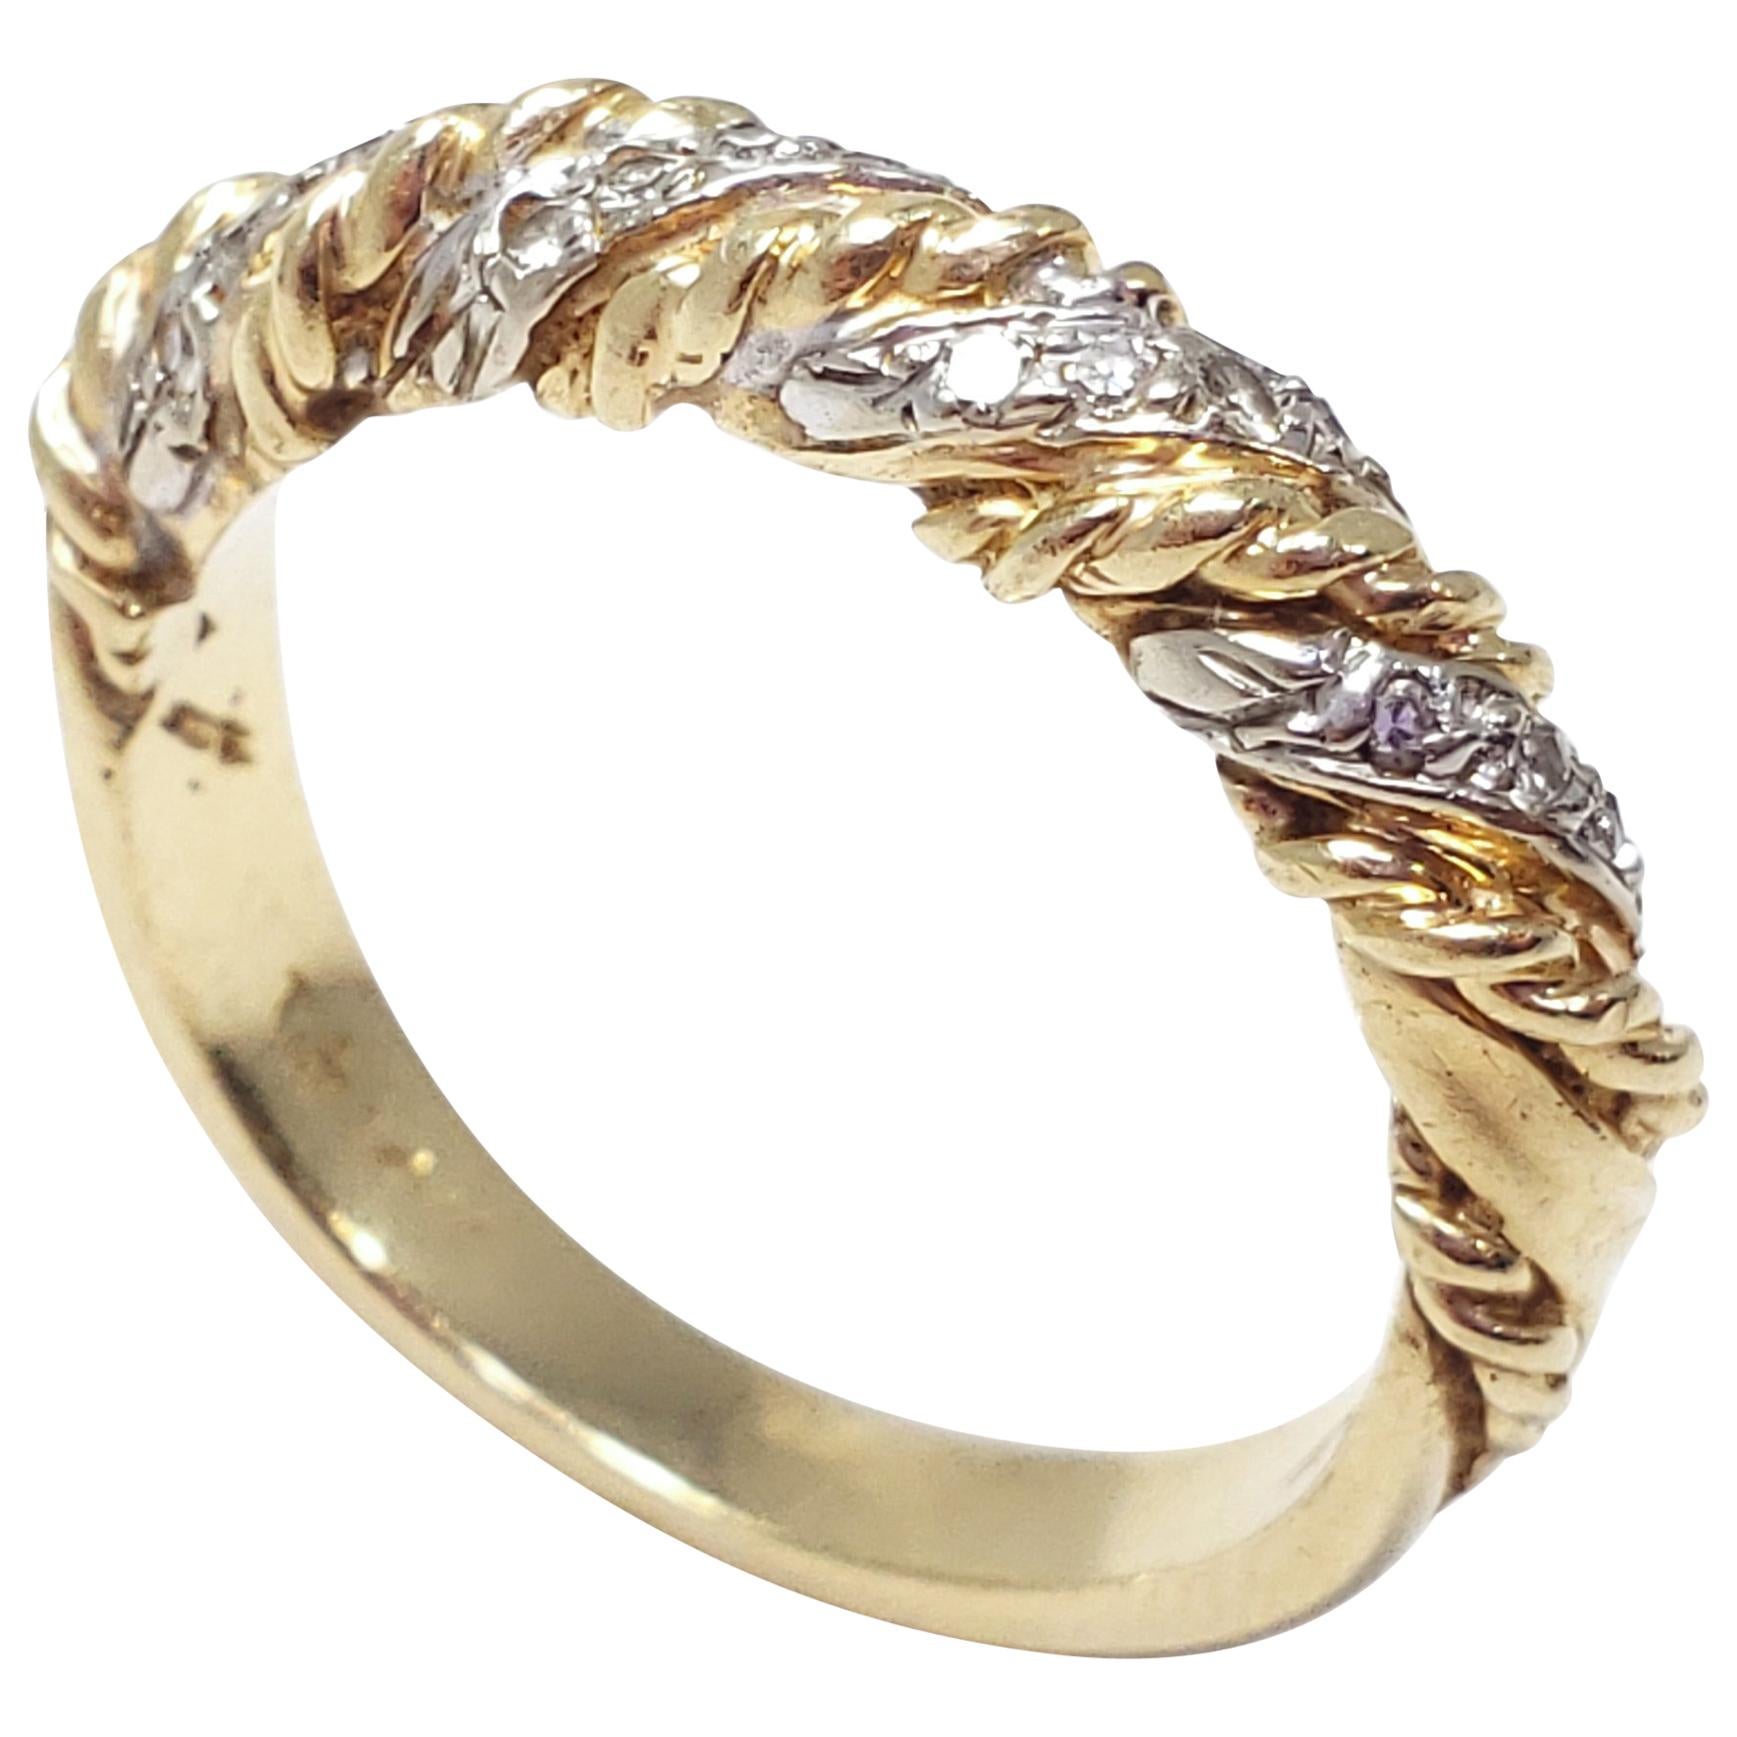 .16 Carat Diamond 14 Karat Gold and Platinum Stylized Twisted Ring Band, 1970 For Sale